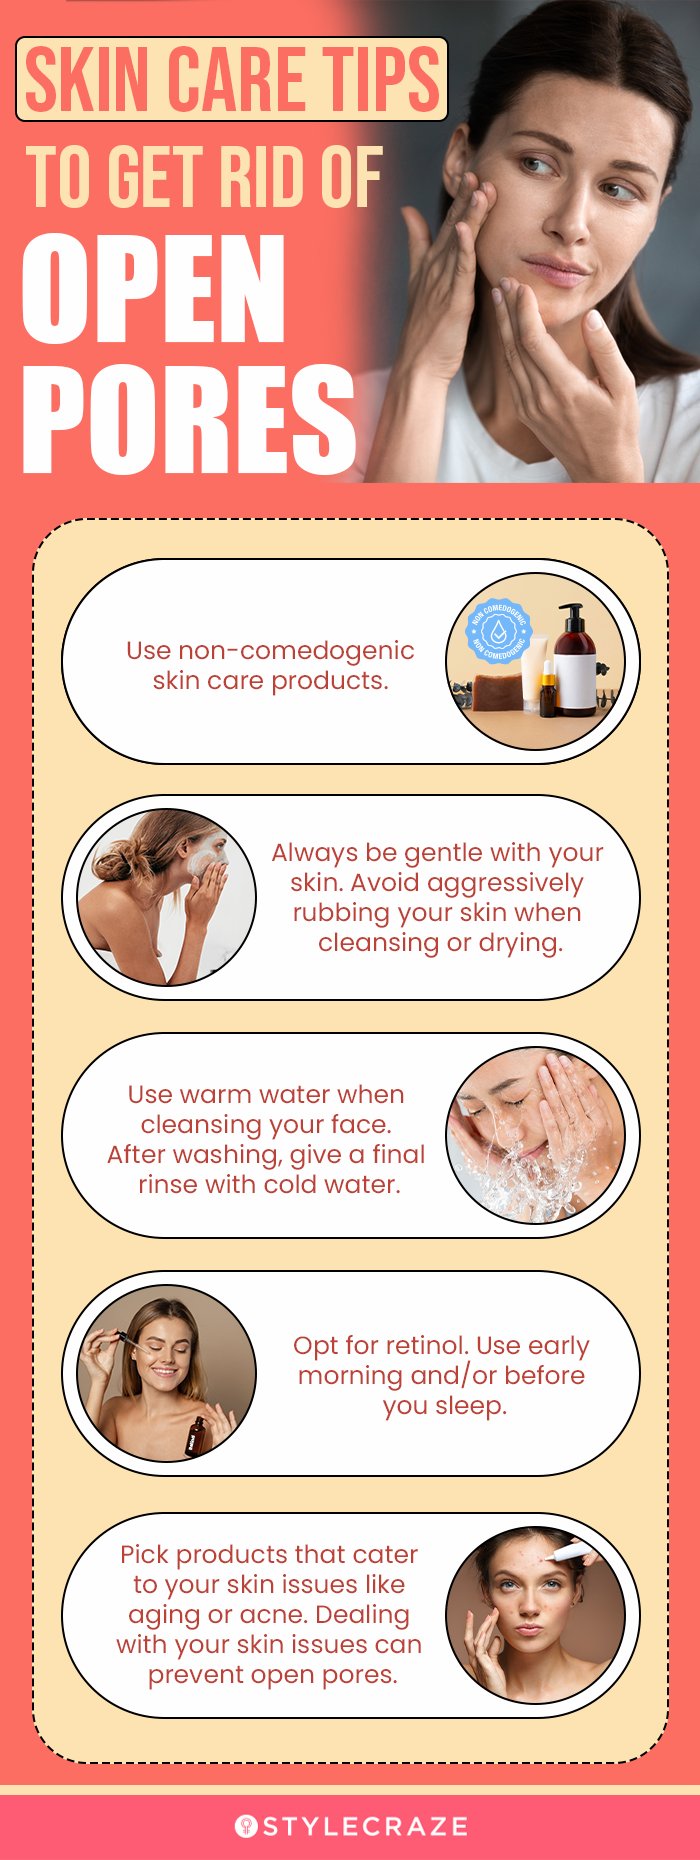 skin care tips to get rid of open pores (infographic)